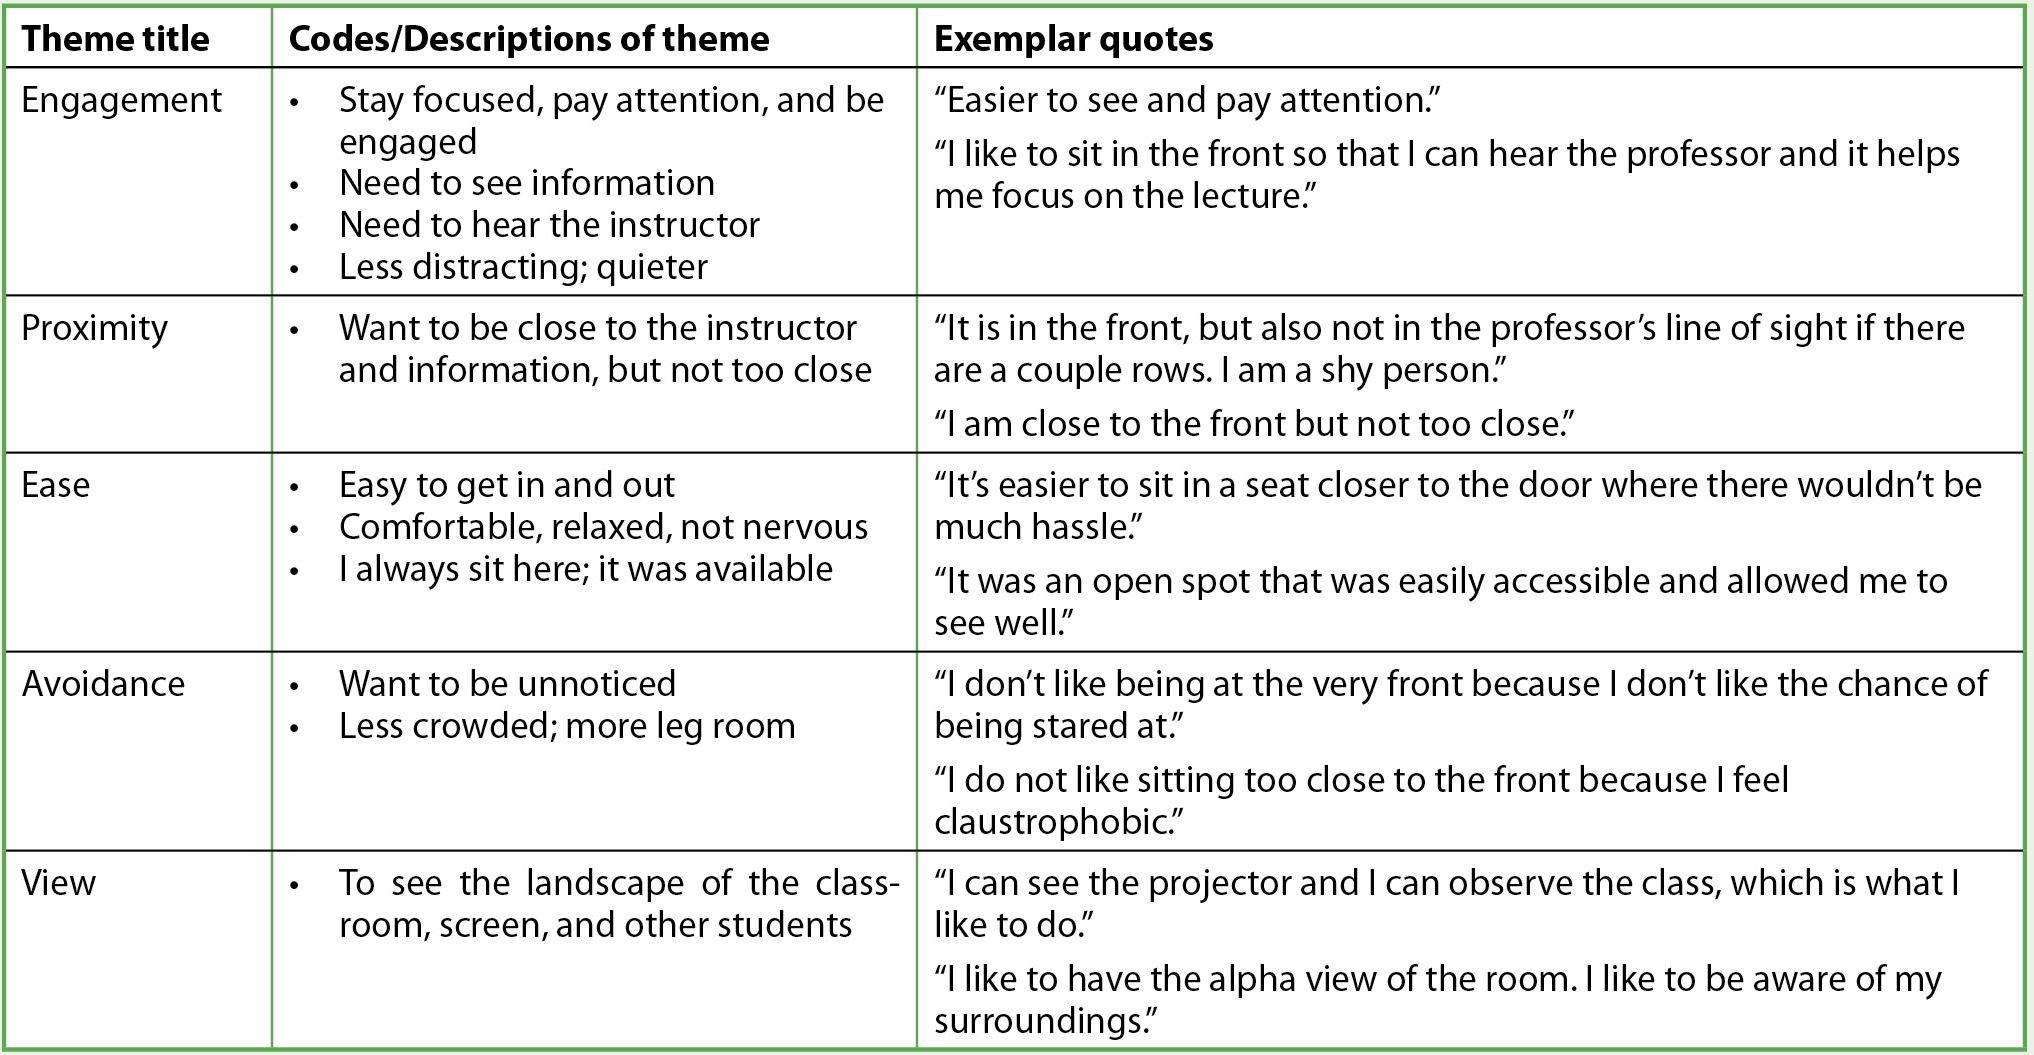 The most frequent final themes related to students’ preferred seating location, with a description and supporting quotes.